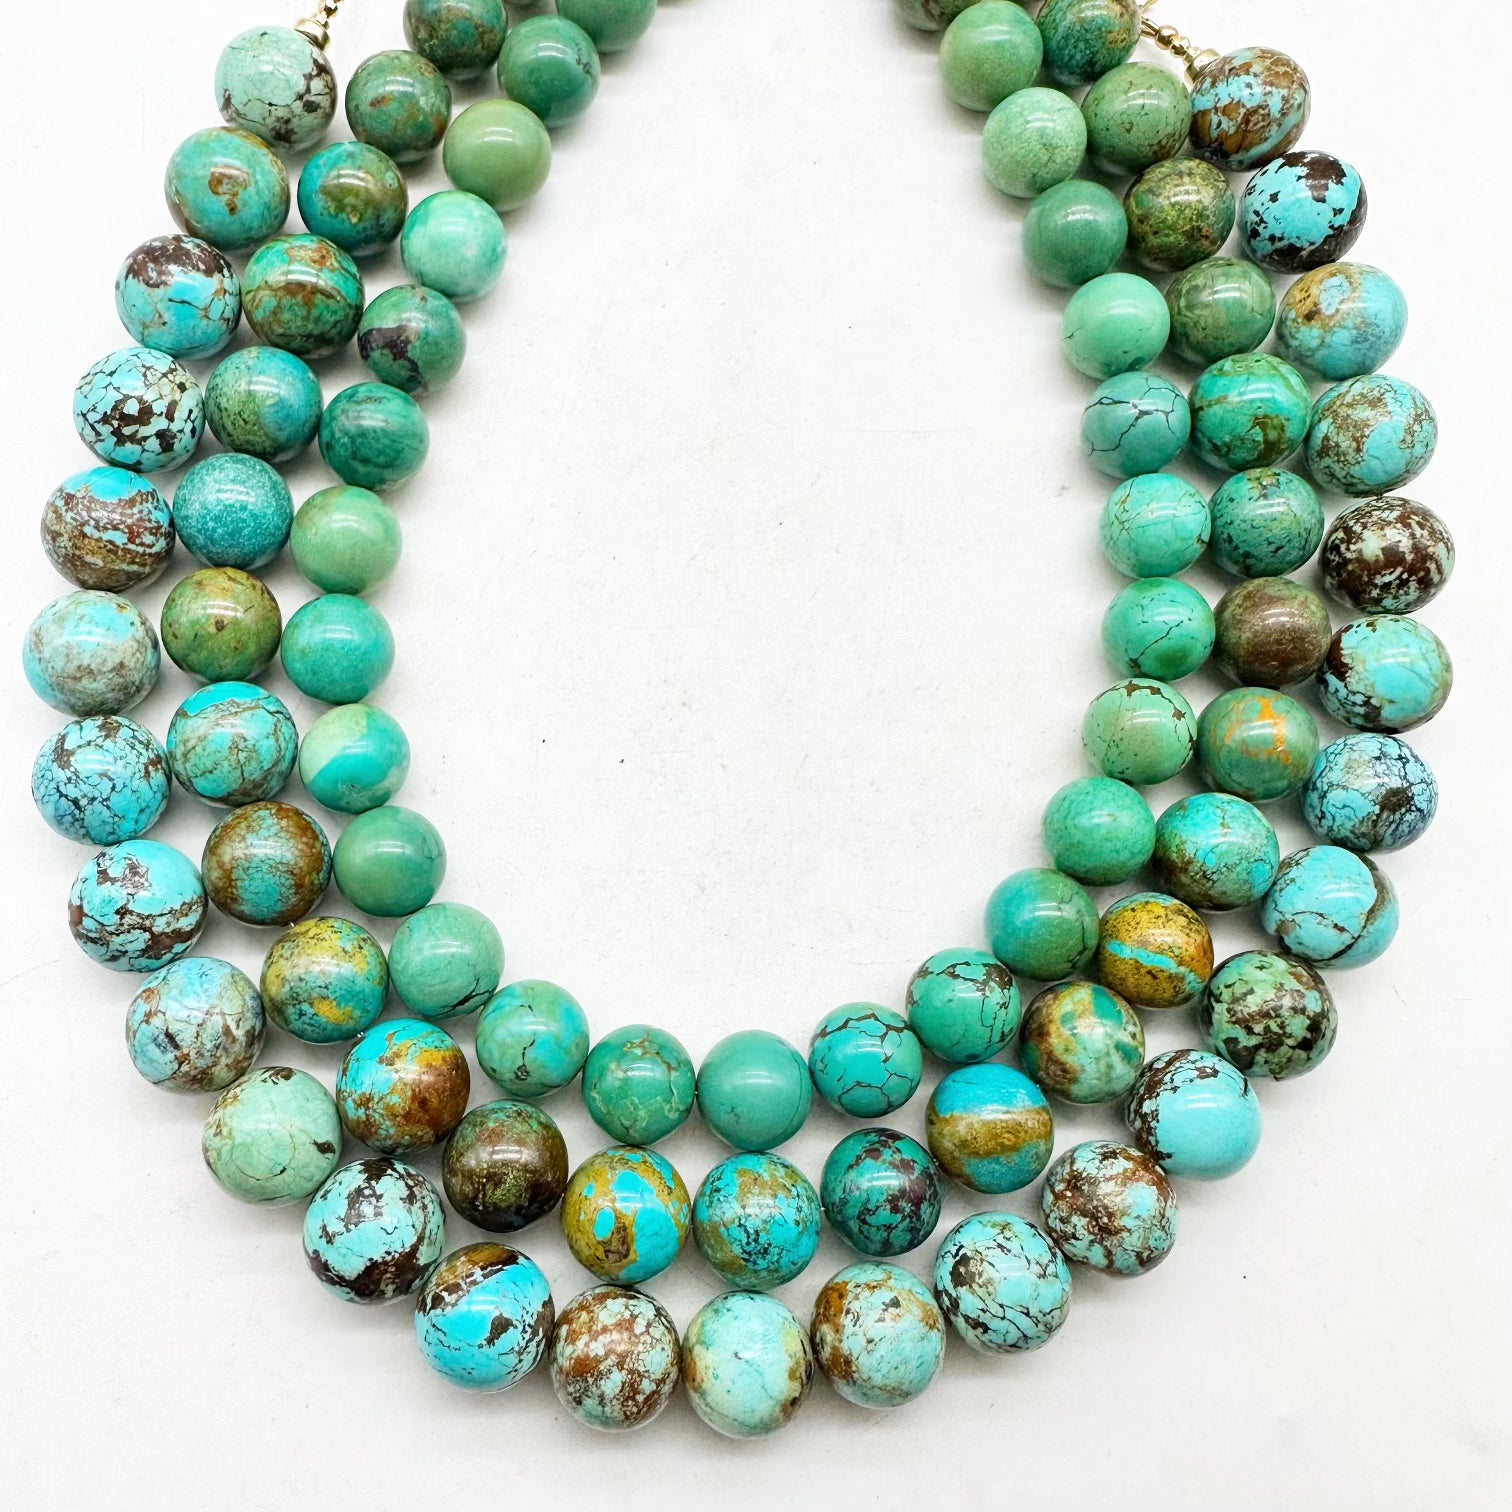 14-15MM VINTAGE TURQUOISE NECKLACES